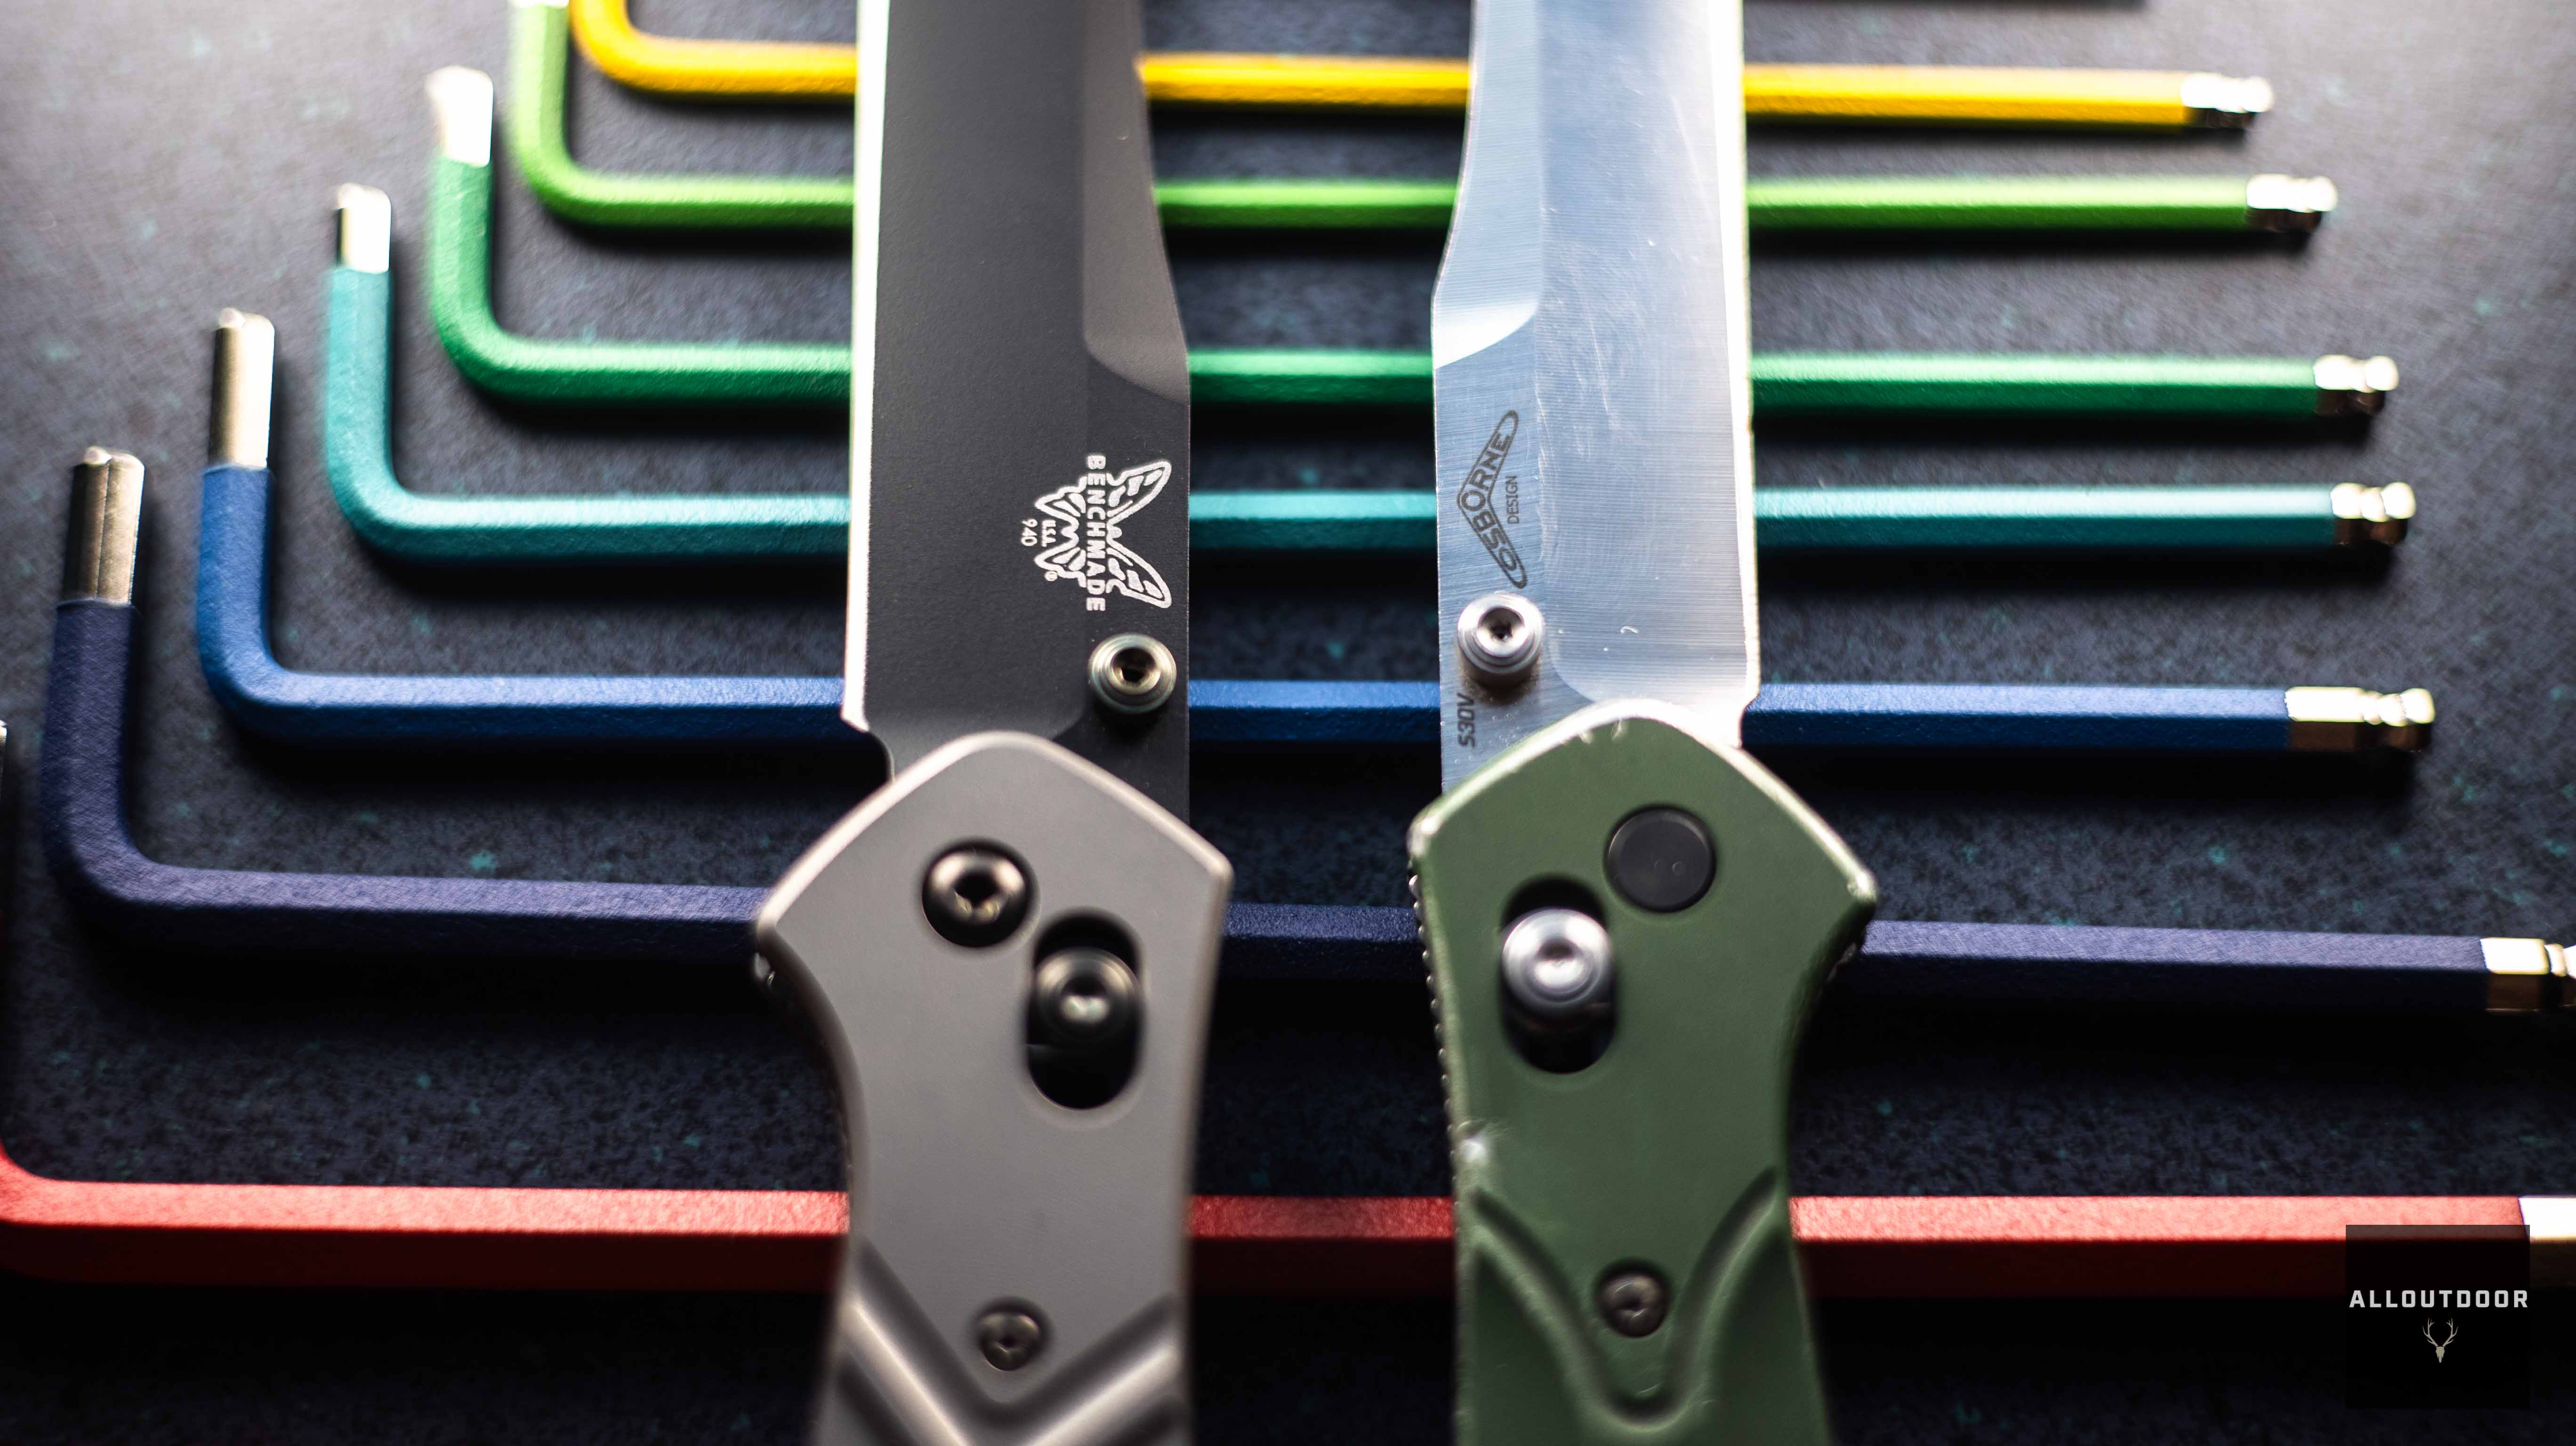 Benchmade Custom 940 - Crafting your Very Own, One-of-a-Kind Knife